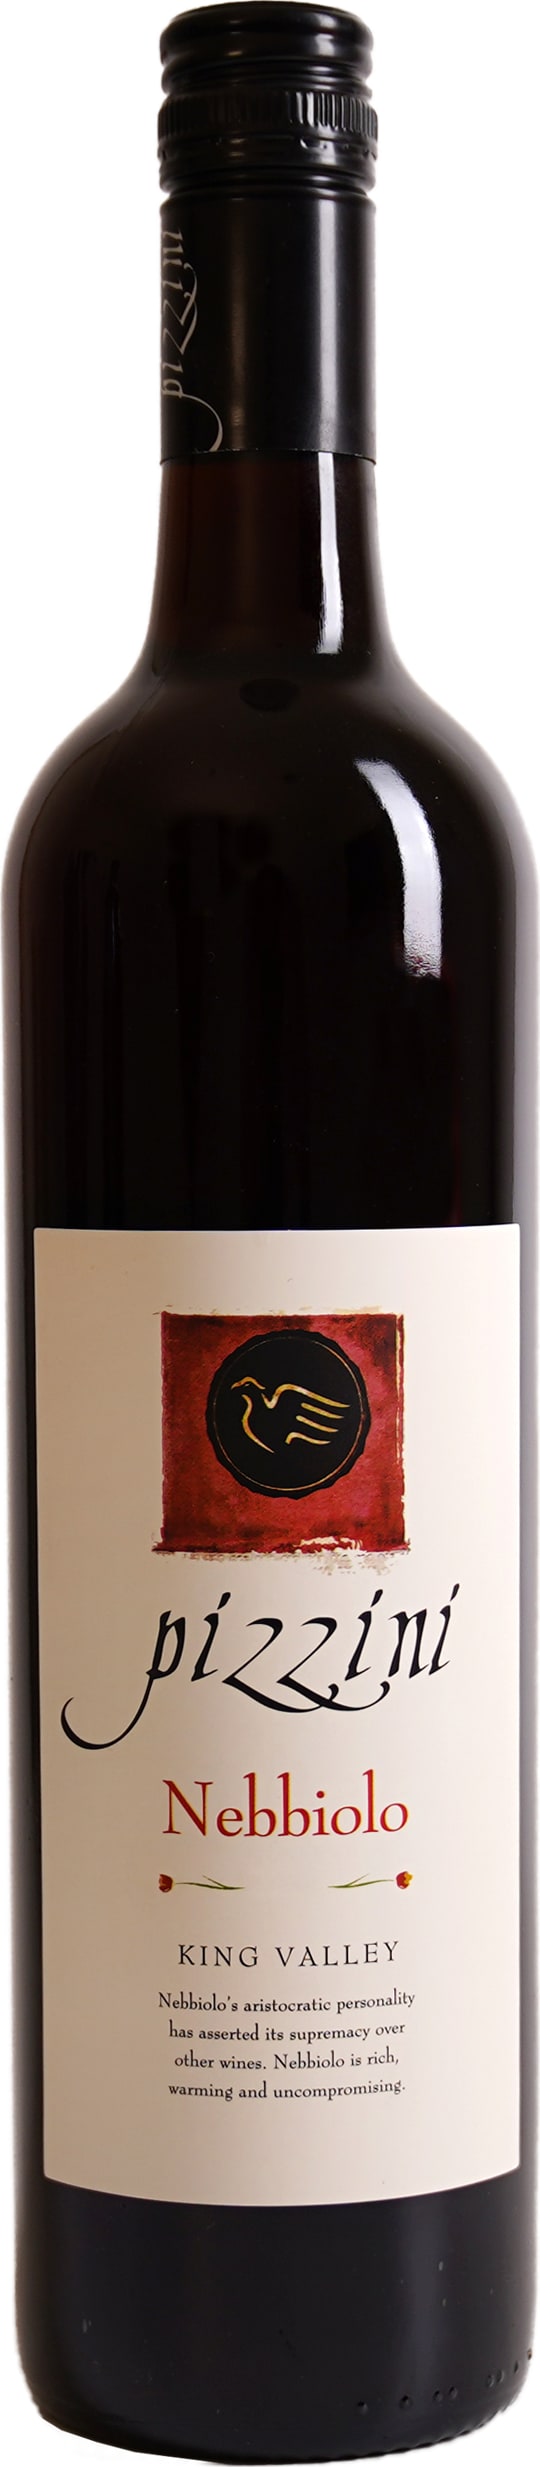 L'Aquila Nebbiolo 18 Pizzini 75cl - Buy Pizzini Wines Wines from GREAT WINES DIRECT wine shop